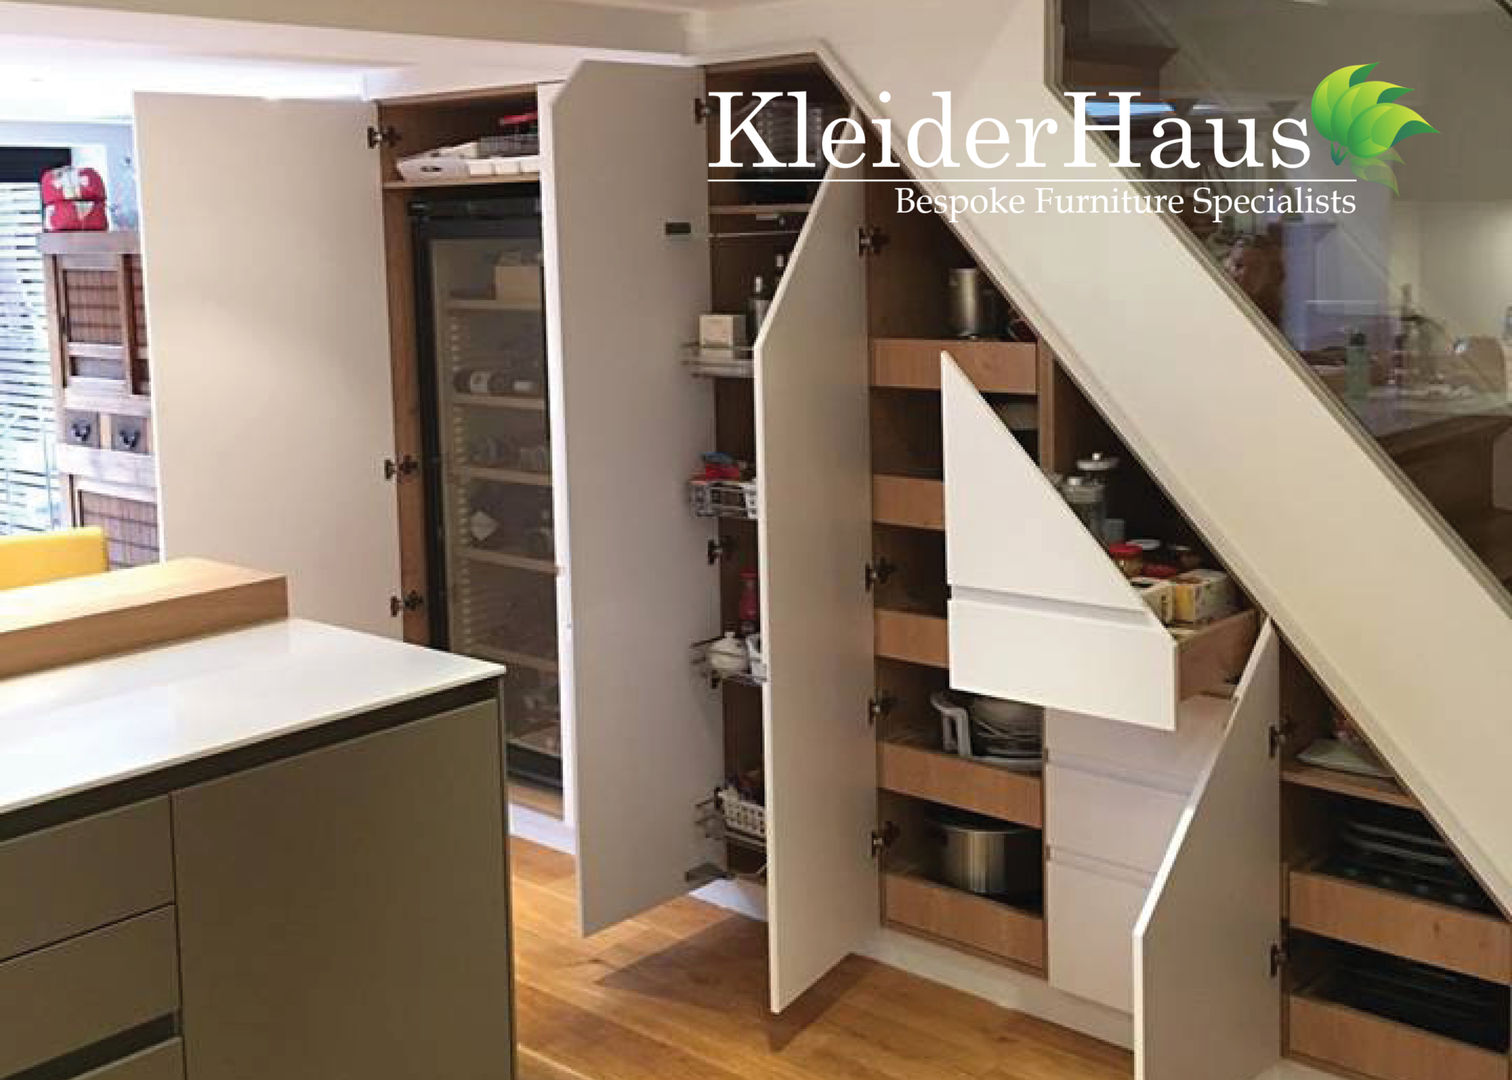 Kitchen Understairs unit - Finally project Completed by Kleiderhaus Kleiderhaus ltd Modern kitchen understairs,kitchen understairs,kitchen,fitted kitchen,utility,made to measure,awkward space,bespoke kitchen,joinery,kitchen remodeling,custom made,under-stairs